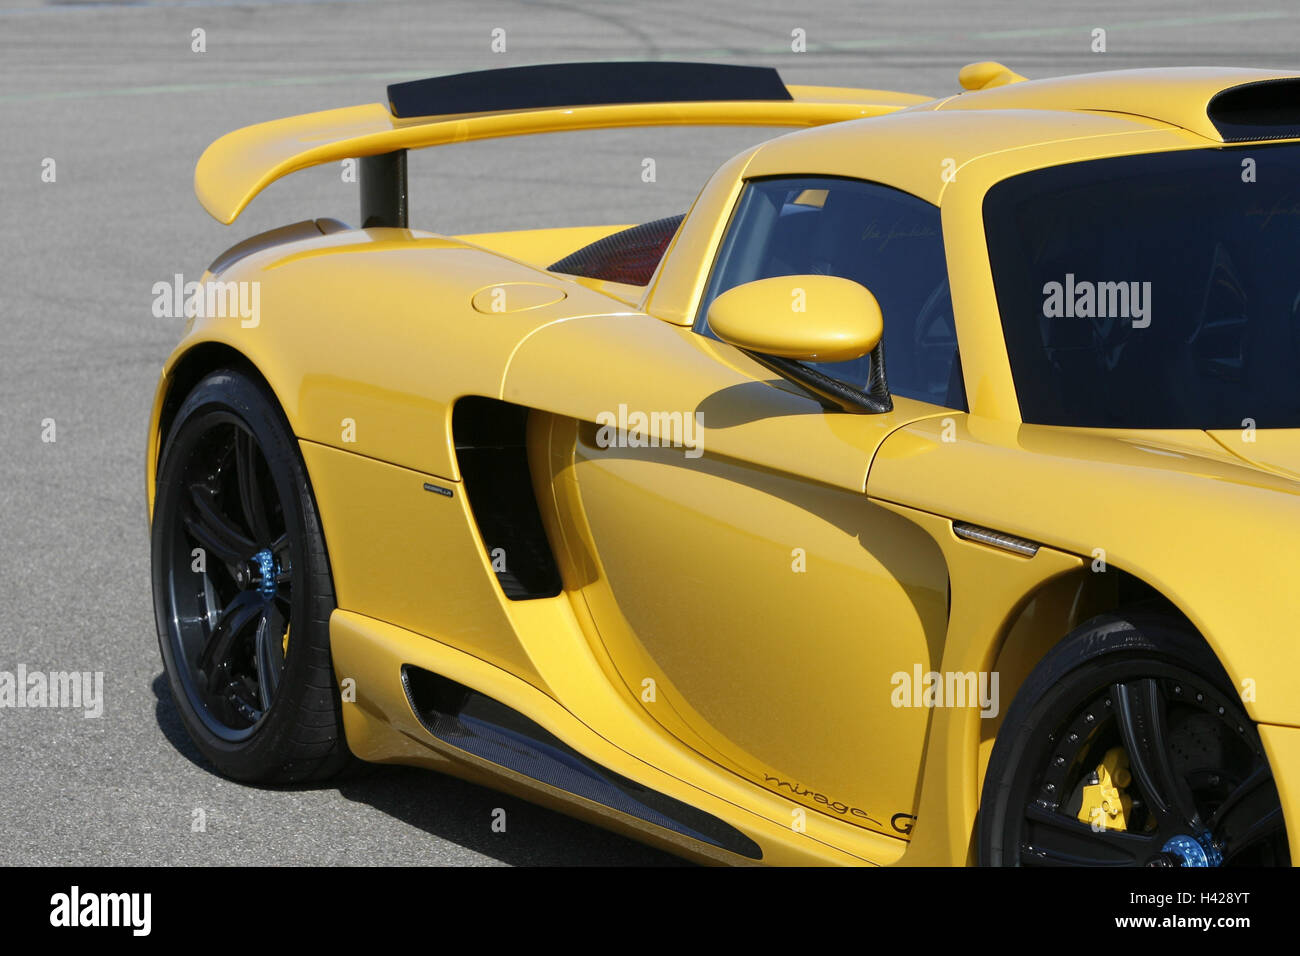 Of Gemballa' Mirage GT', Porsche, yellow, outside, view kerbside on rear Stock Photo